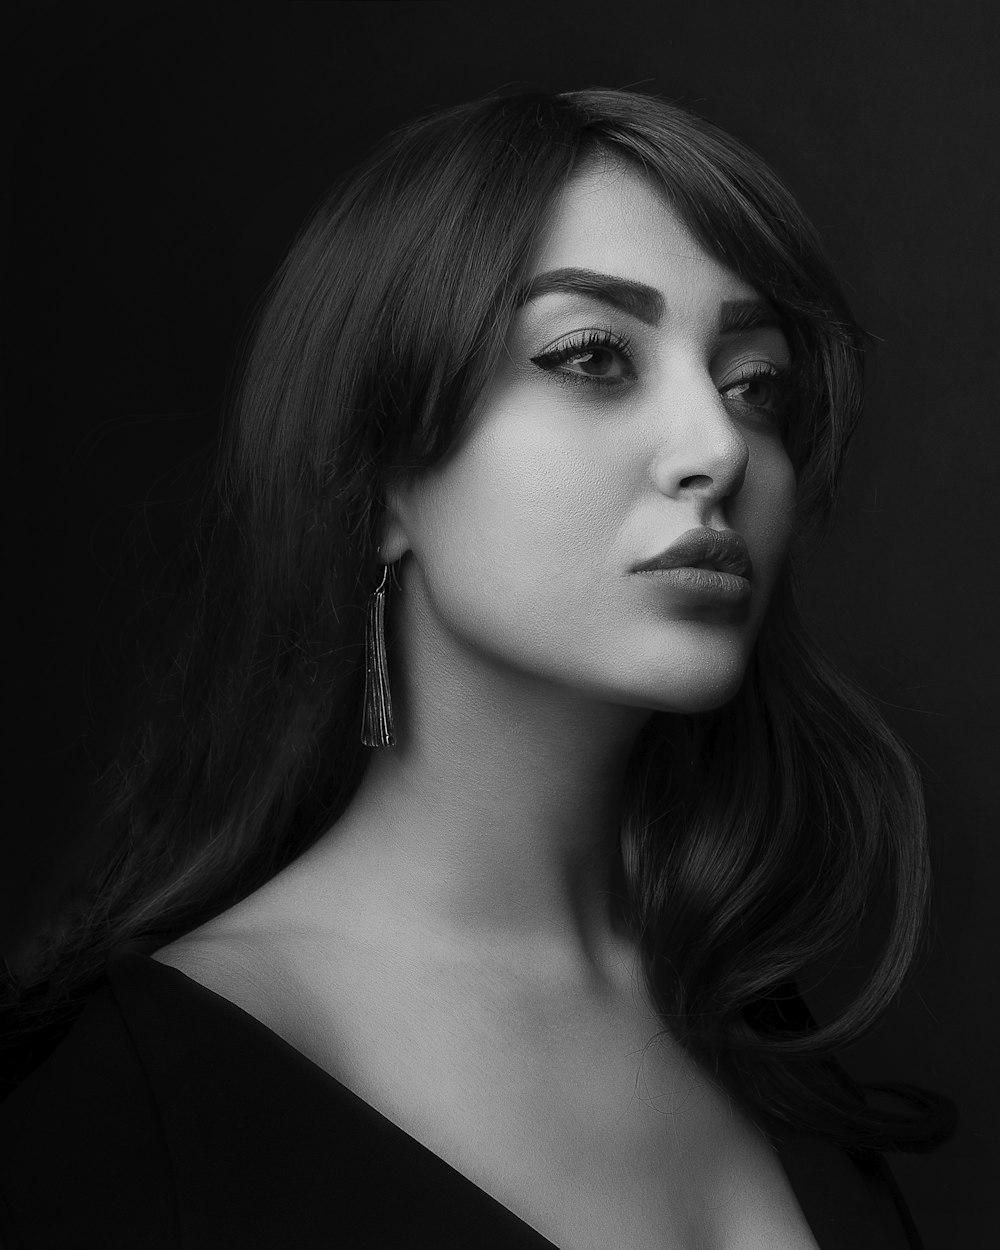 grayscale photo of woman wearing black top in black background